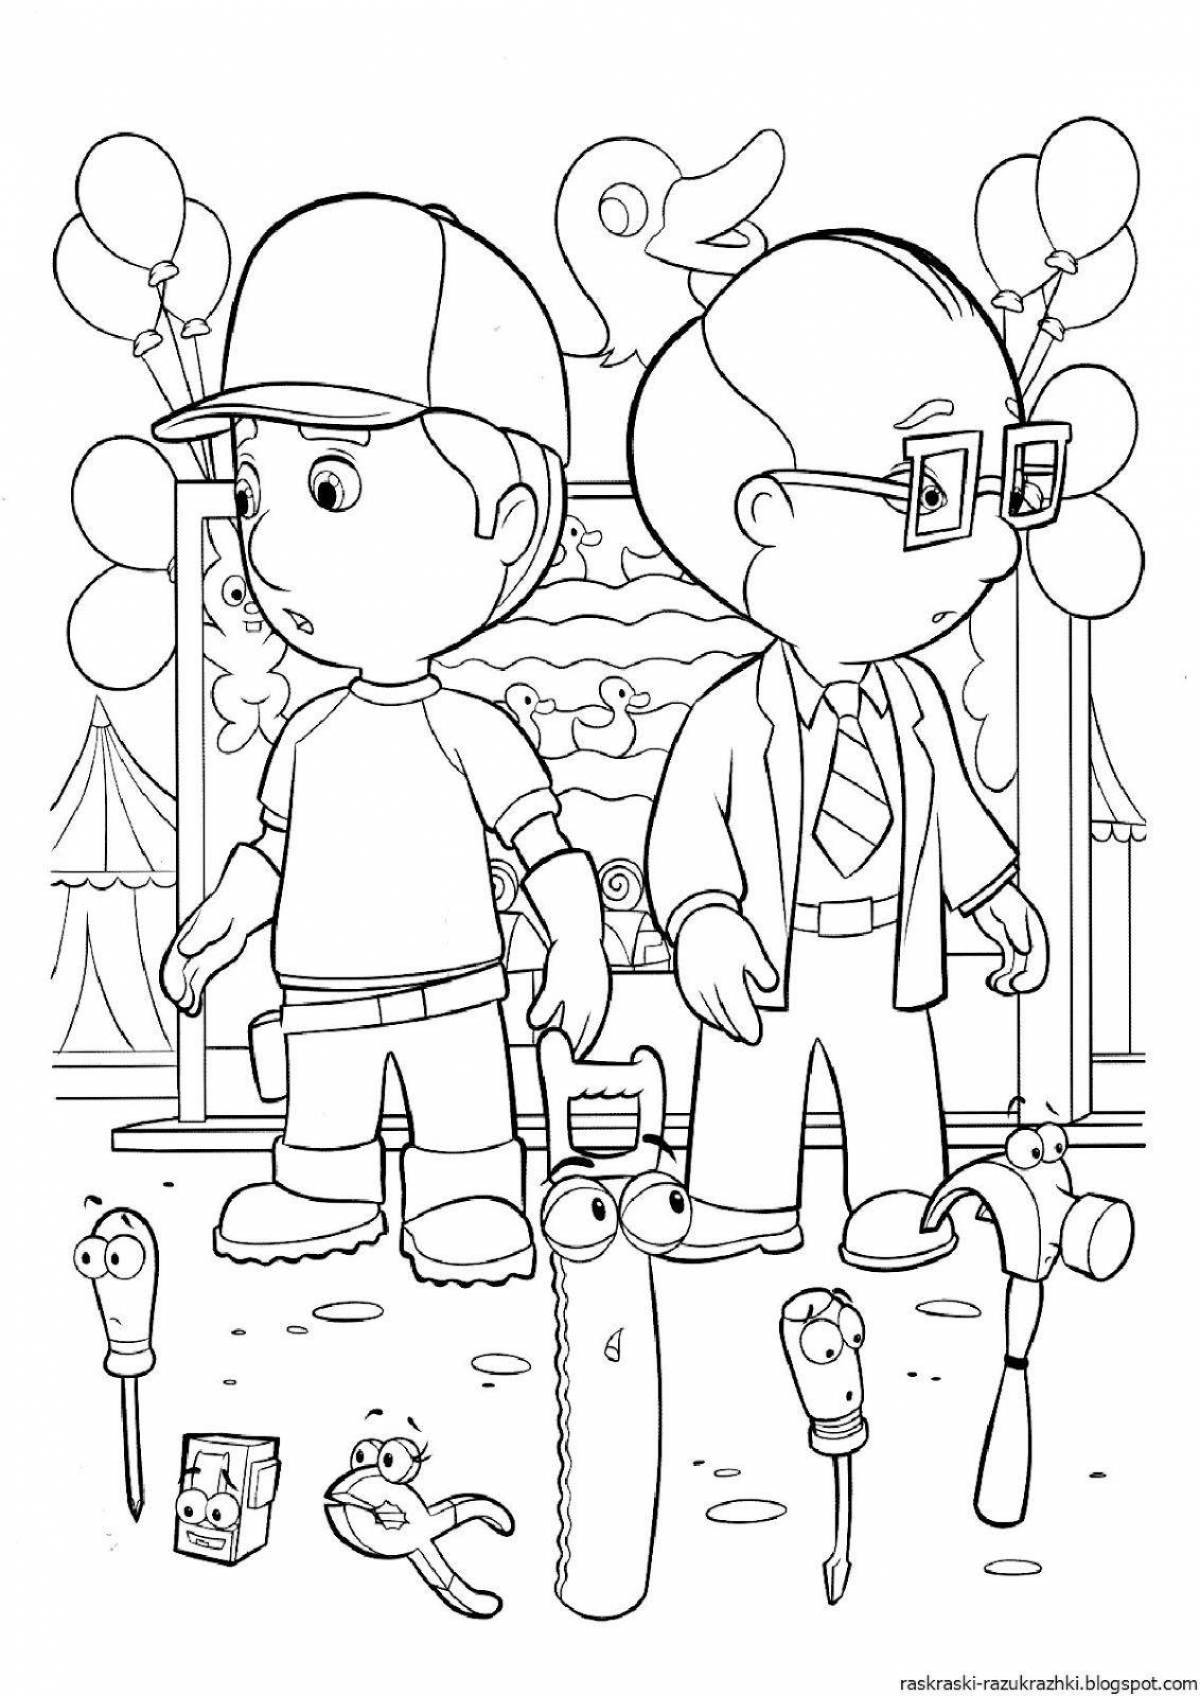 Detailed occupational health and safety coloring page